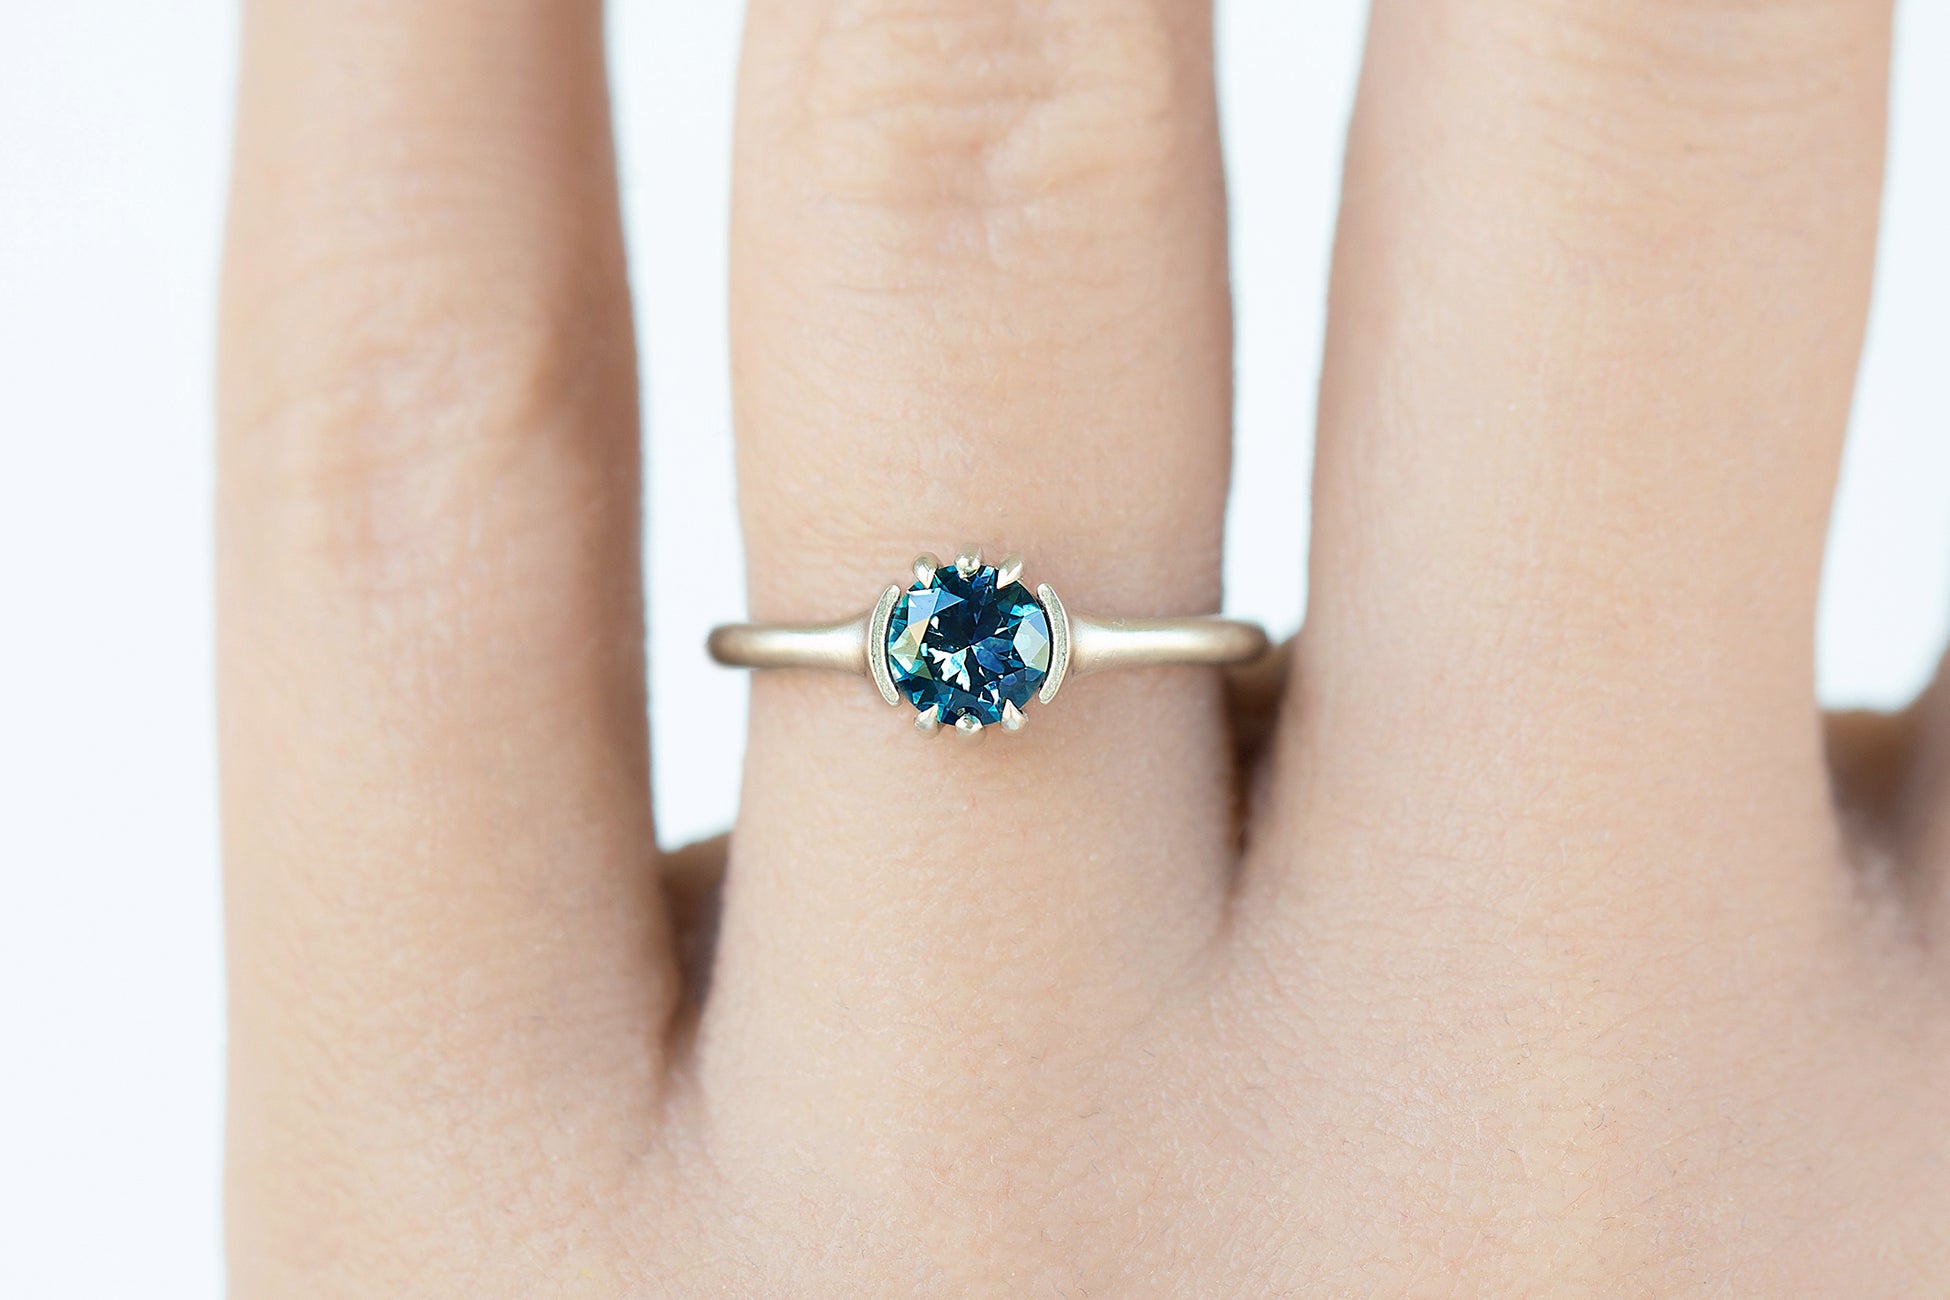 Recycled Raw White Gold Montana Sapphire Ring - S. Kind & Co